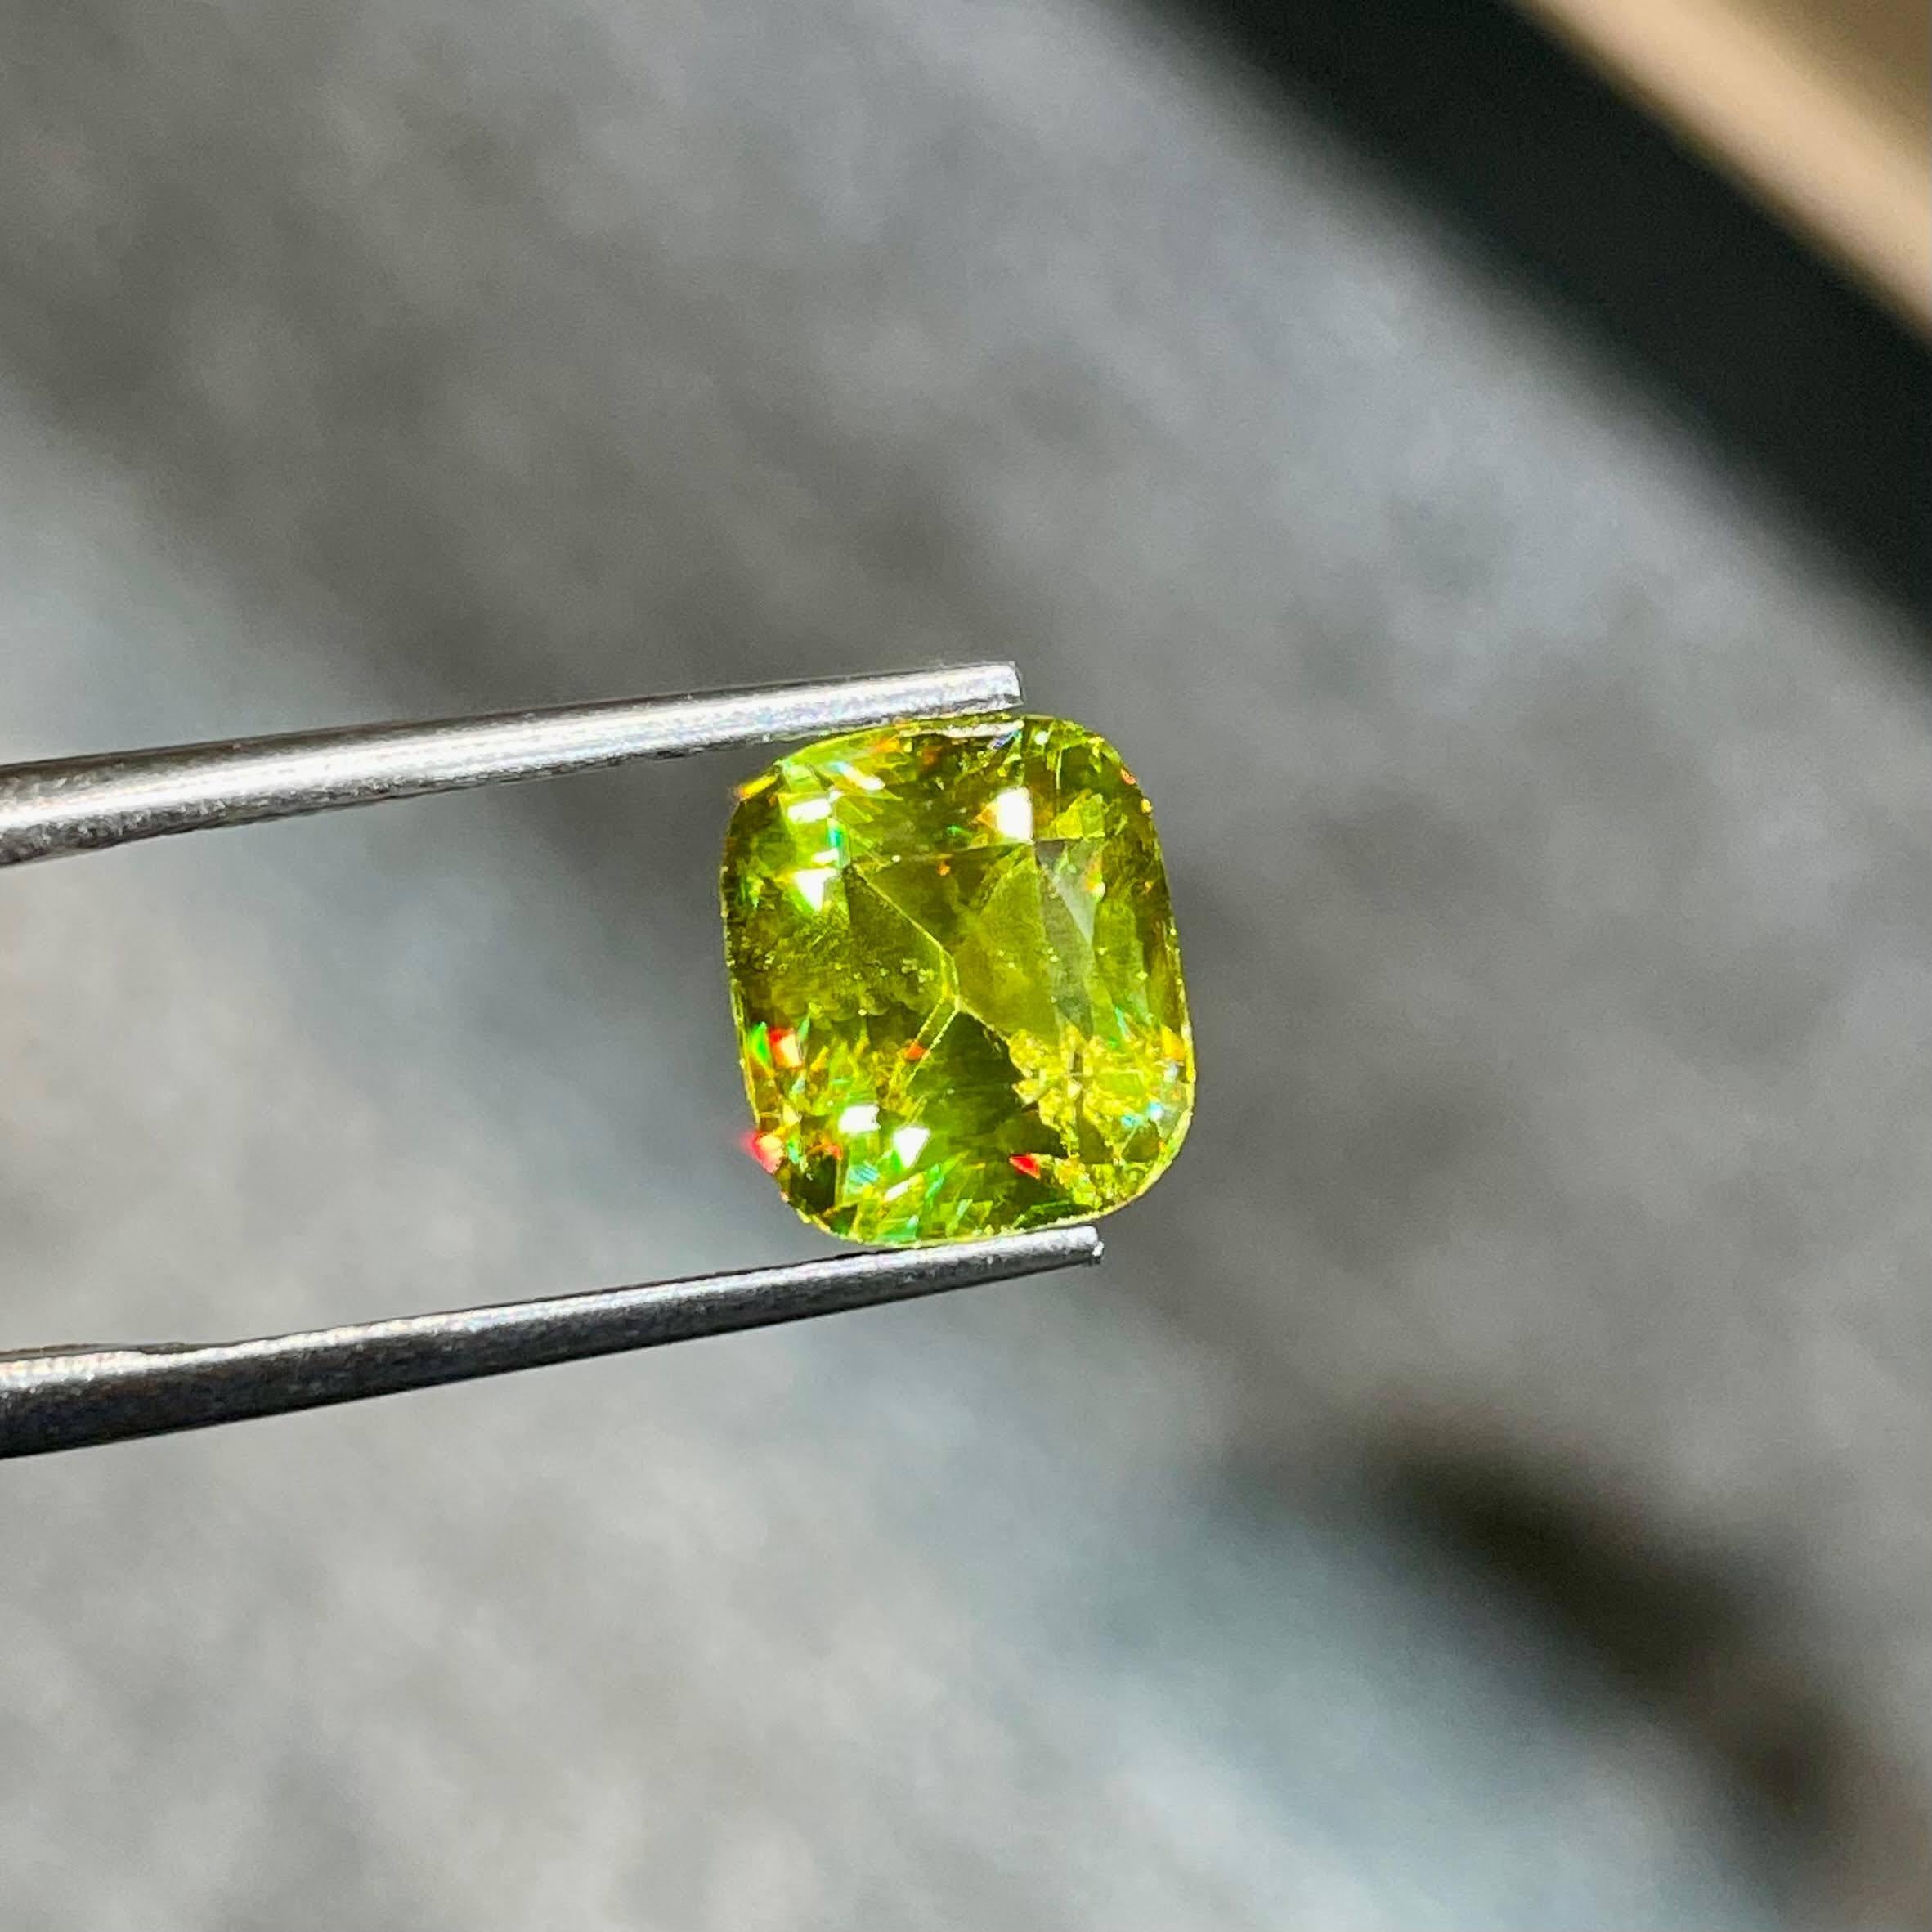 Weight 4.05 carats 
Dim 9.5x8.2x6.34 mm
Clarity VVS
Treatment None
Origin Madagascar
Shape Cushion
Cut Step Cushion




In the realm of exquisite gemstones, a dazzling 4.05-carat Sphene takes center stage, showcasing the epitome of top quality